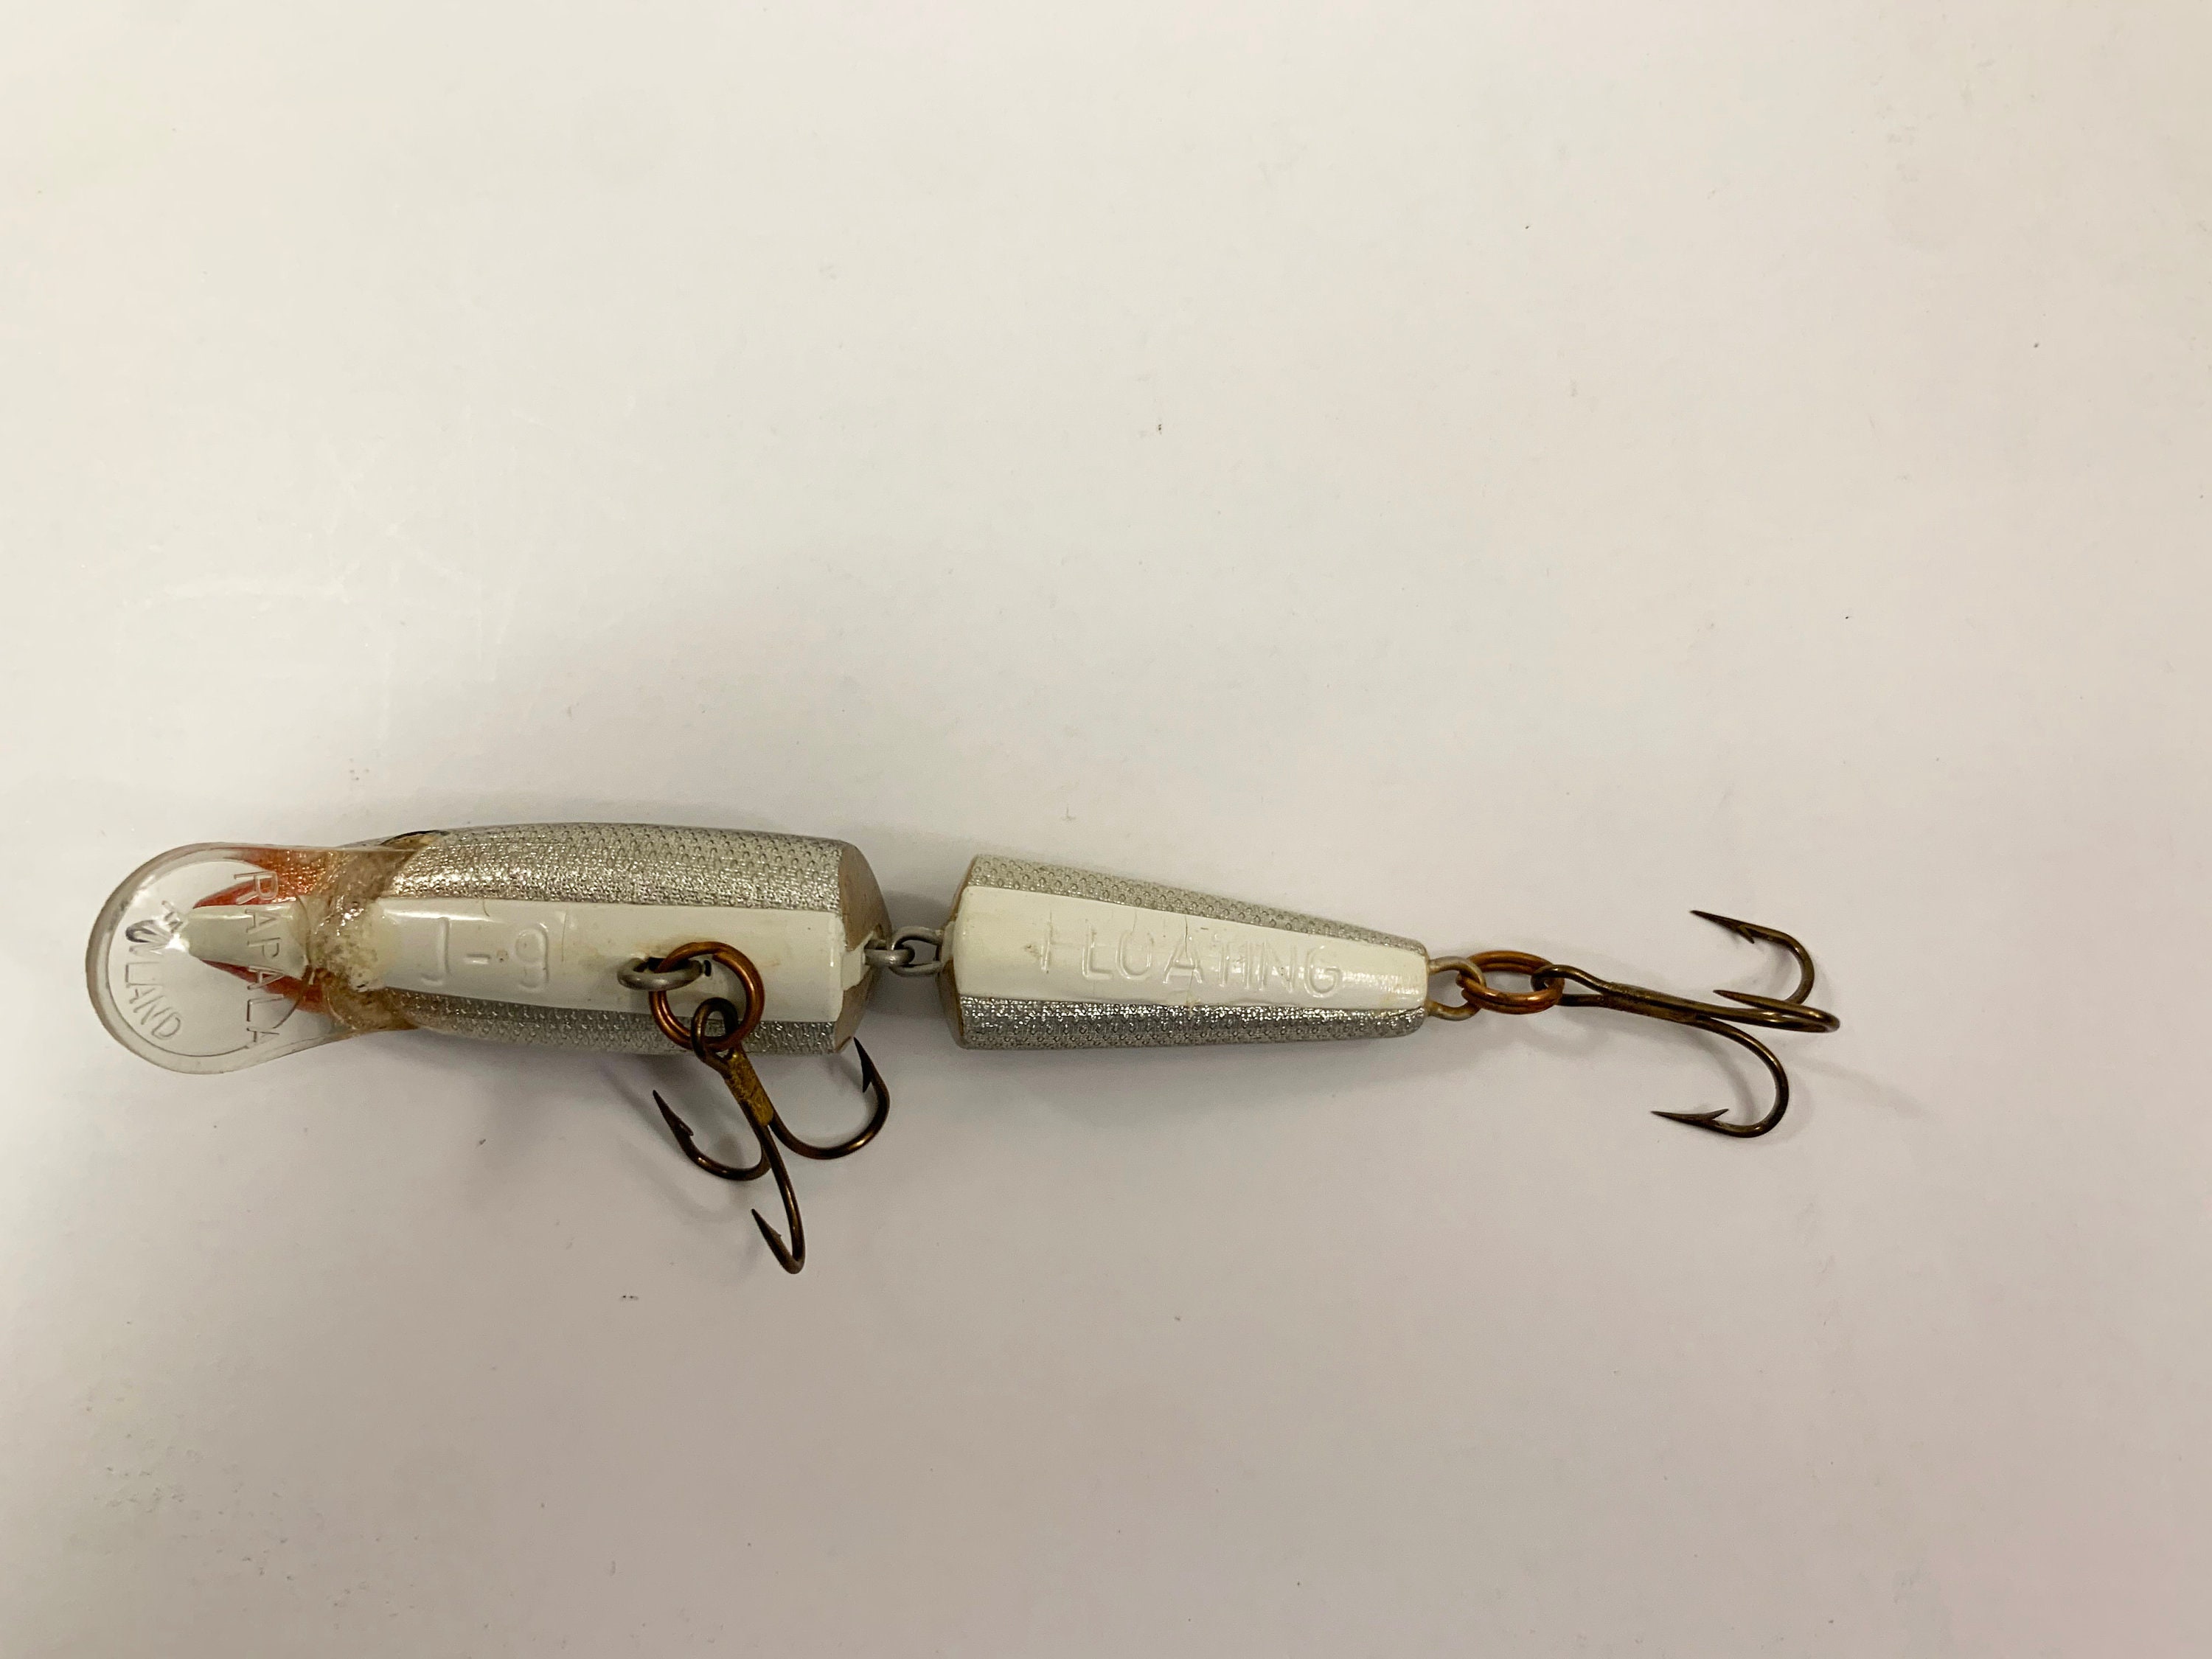 Lot #8700 Rapala Jointed Floating J-13 B Blue Ireland Fair/Good Condition –  Association of Evangelicals in Africa